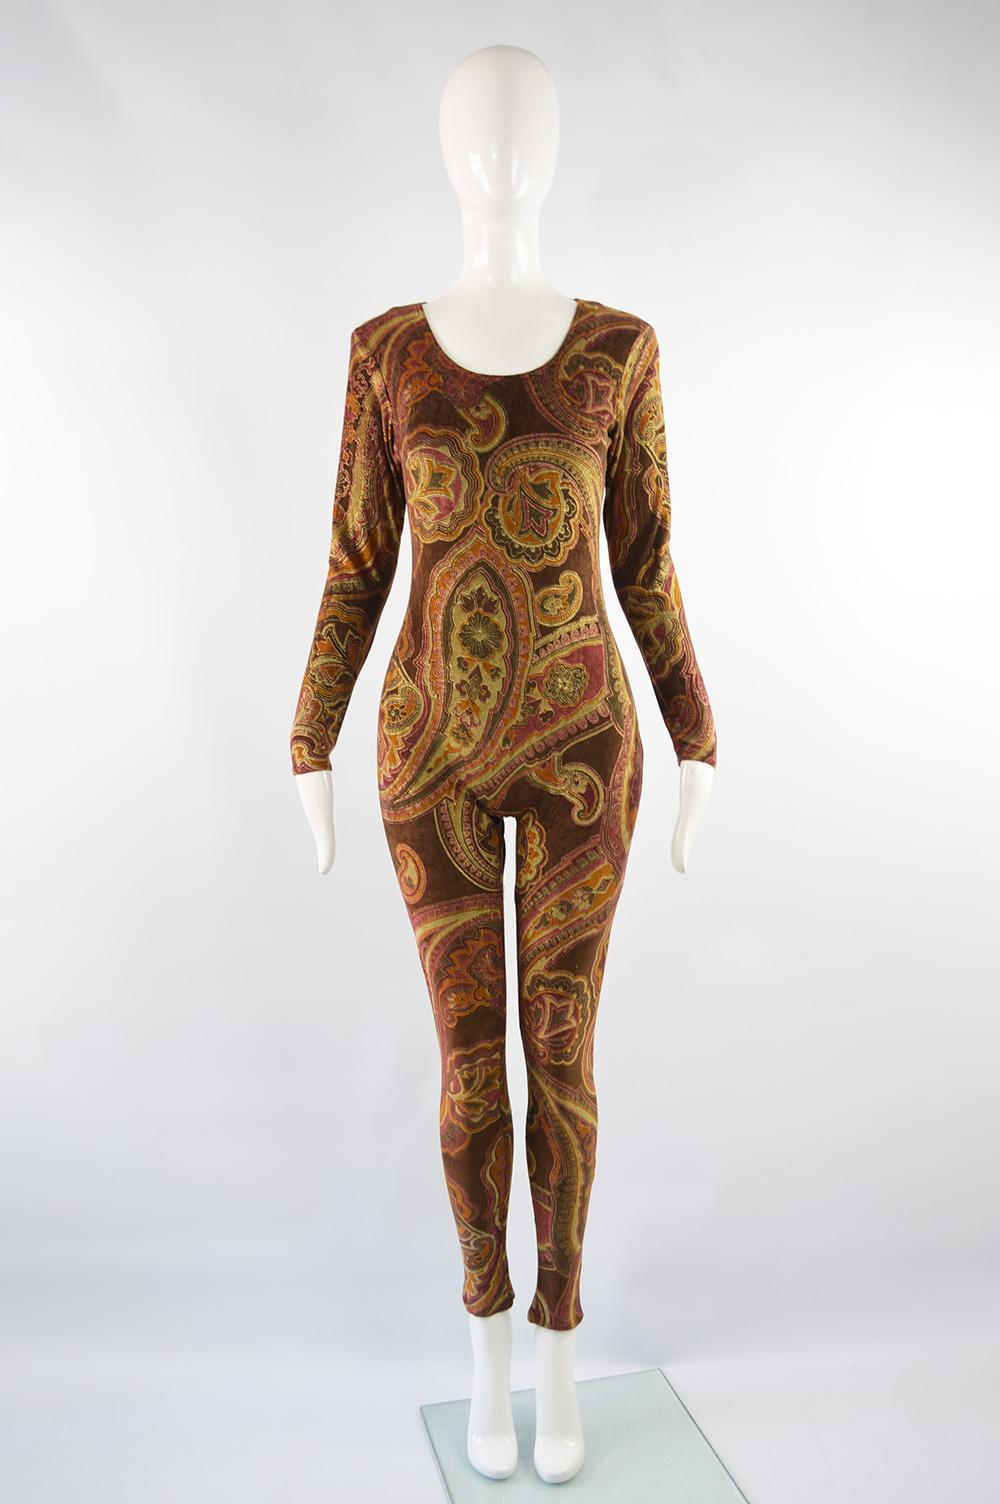 An incredible vintage Zandra Rhodes womens catsuit / jumpsuit in a brown stretch velvet / velour fabric with a gold, pink and green paisley pattern throughout. It makes the most stunning statement at a party or evening event!

Size: Not indicated;